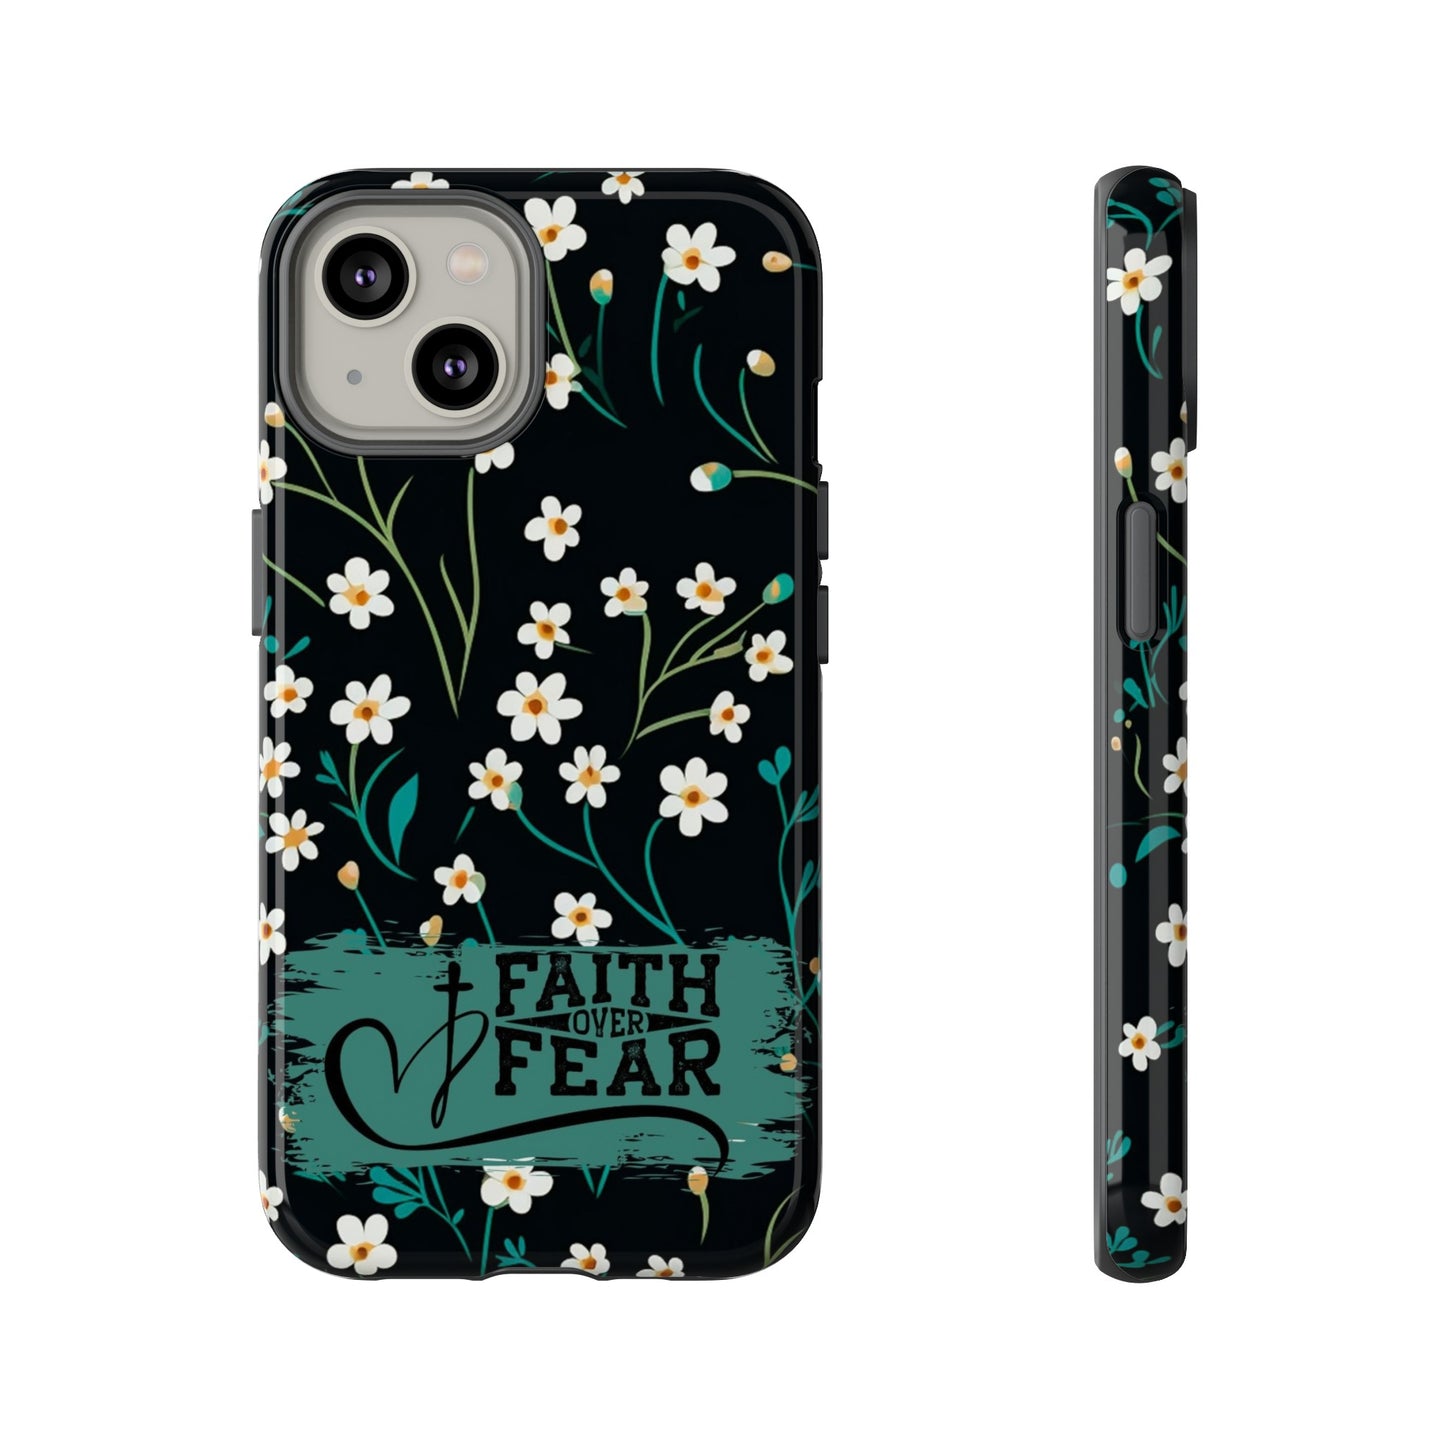 iPhone Case With Faith Over Fear and Cross With Heart